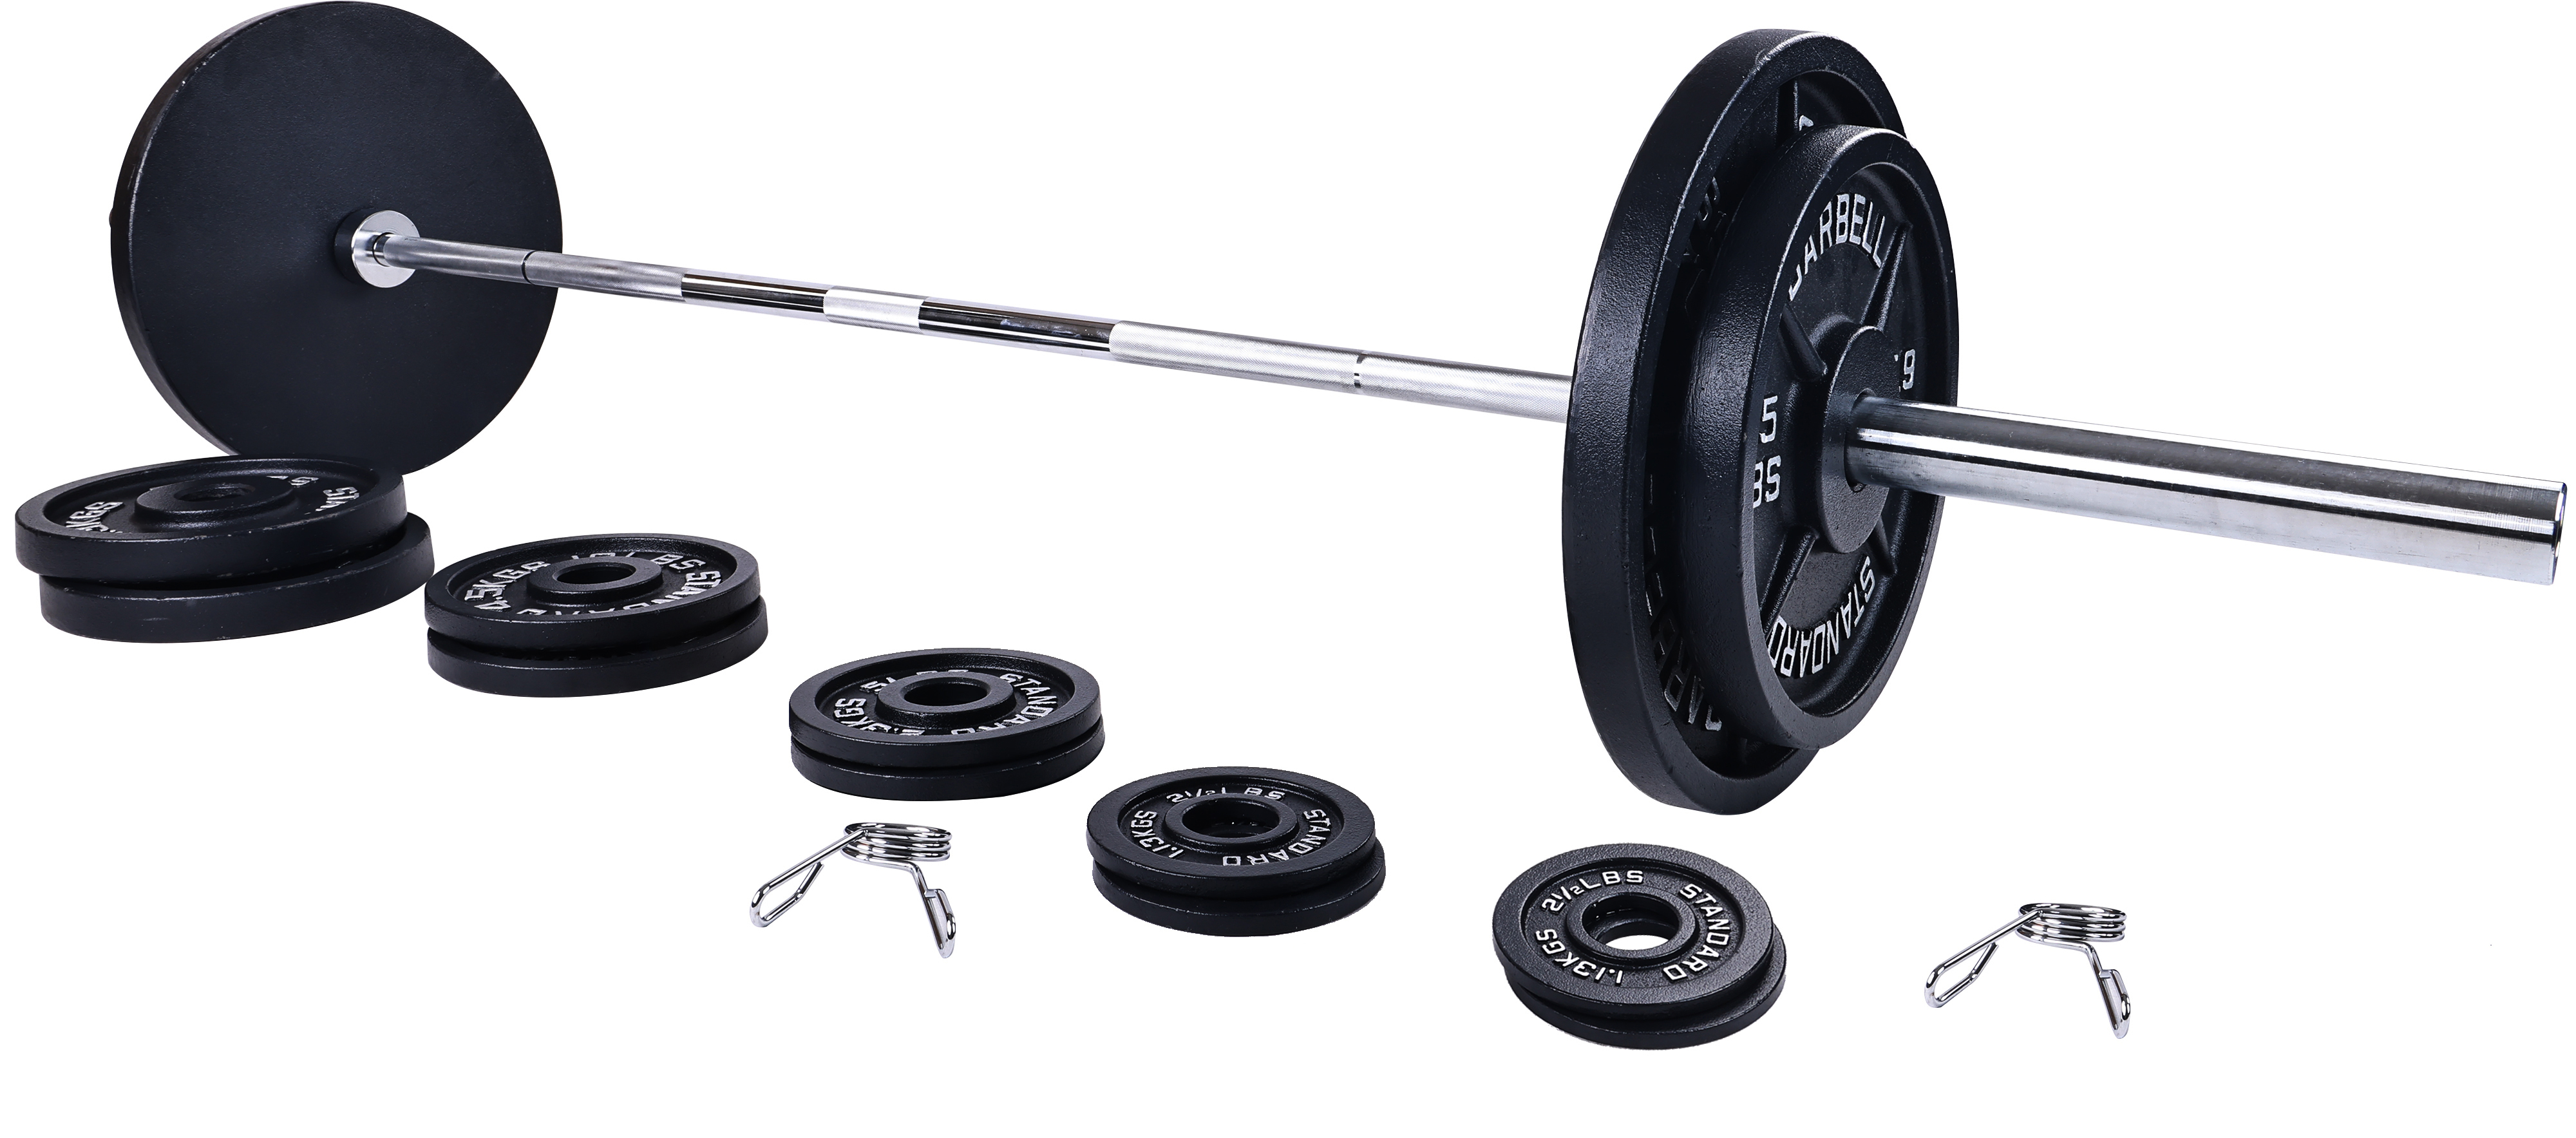 BalanceFrom Cast Iron Olympic Weight Including 7FT Olympic Barbell and Clips, 300-Pound Set (255 Pounds Plates + 45 Pounds Barbell), Multiple Packages - image 3 of 6